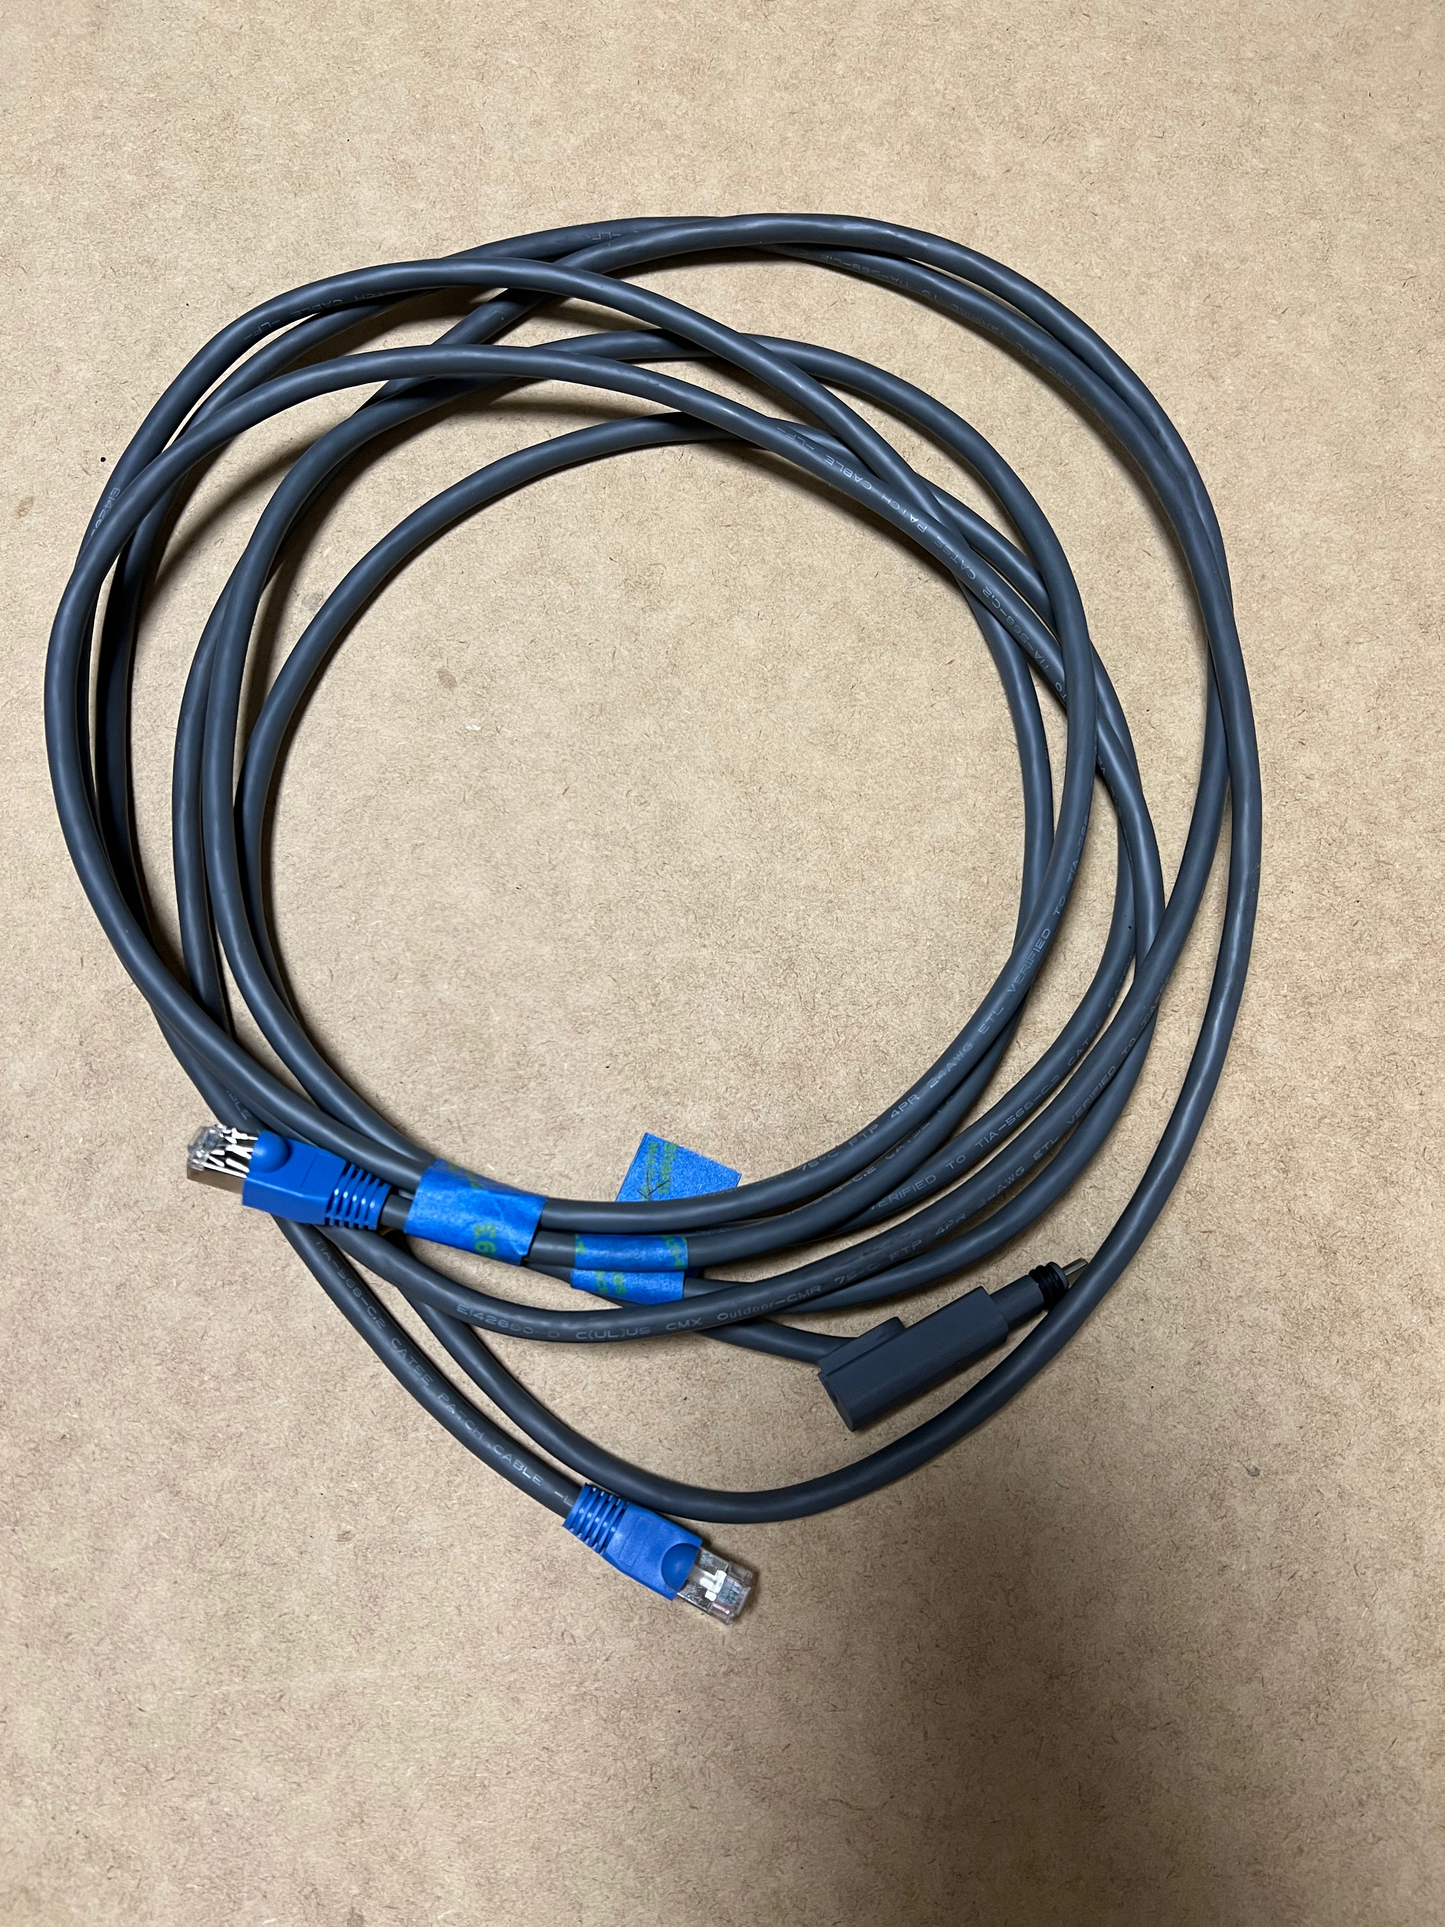 Modify My Starlink Cable